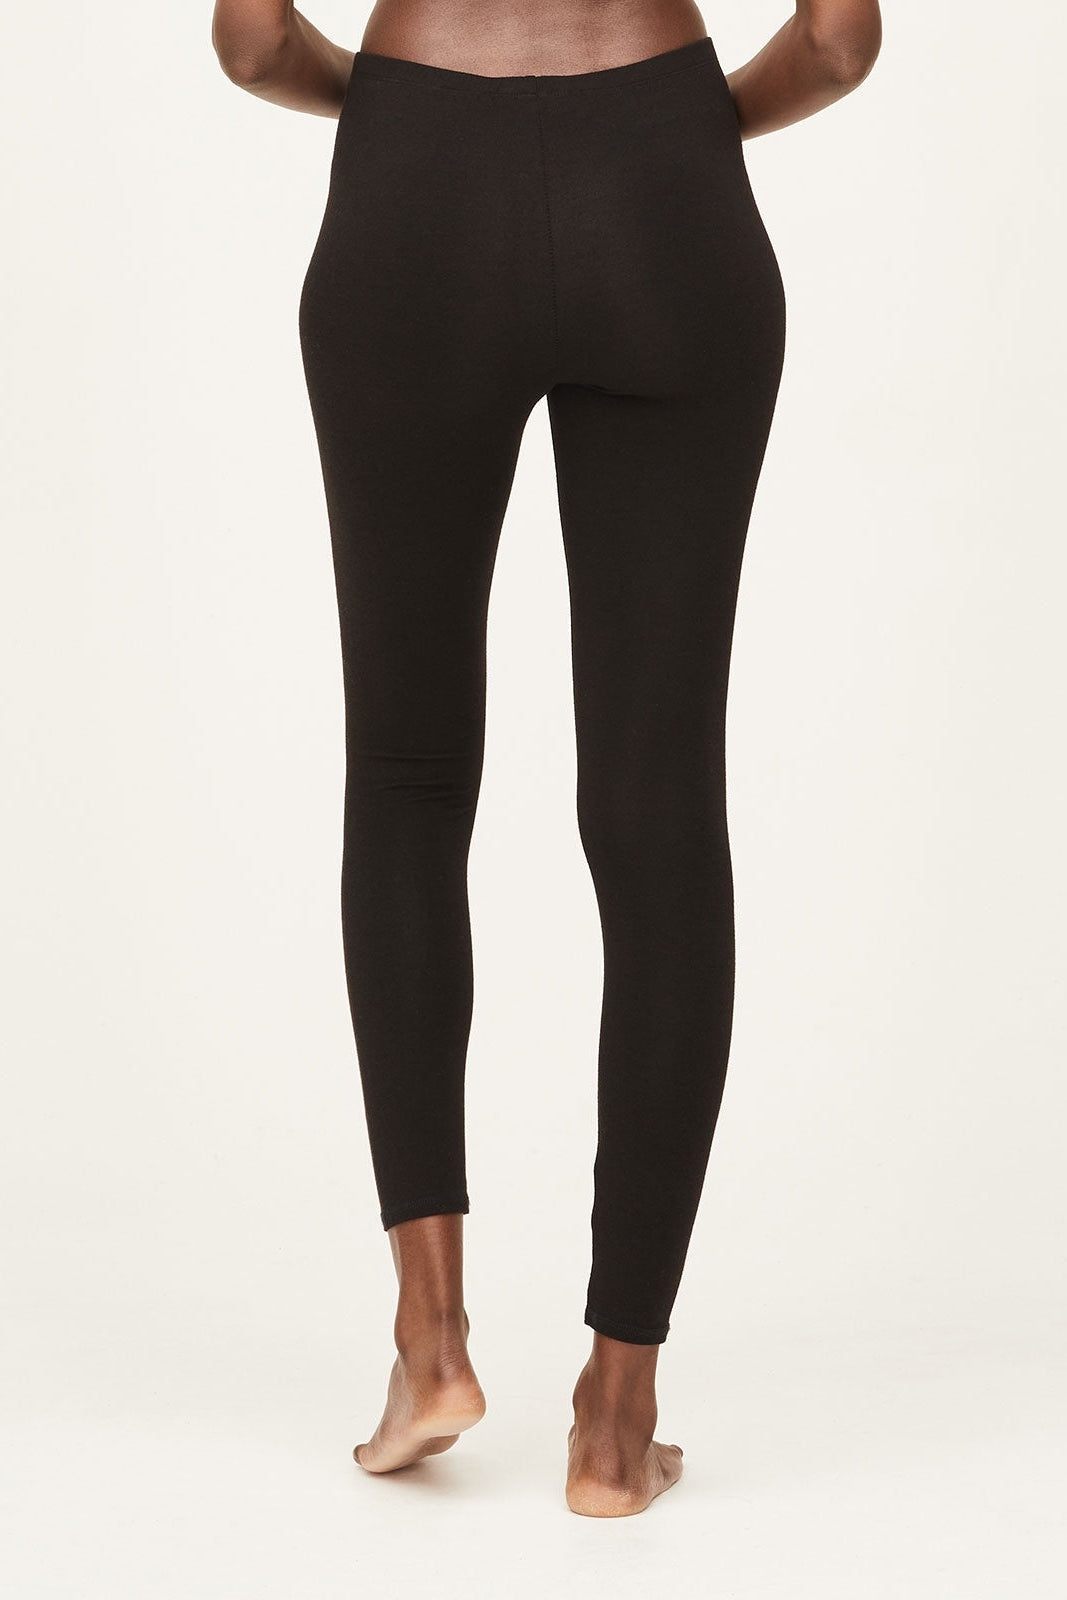 Thought Essential Bamboo Organic Cotton Base Layer Leggings In Black-Womens-Ohh! By Gum - Shop Sustainable